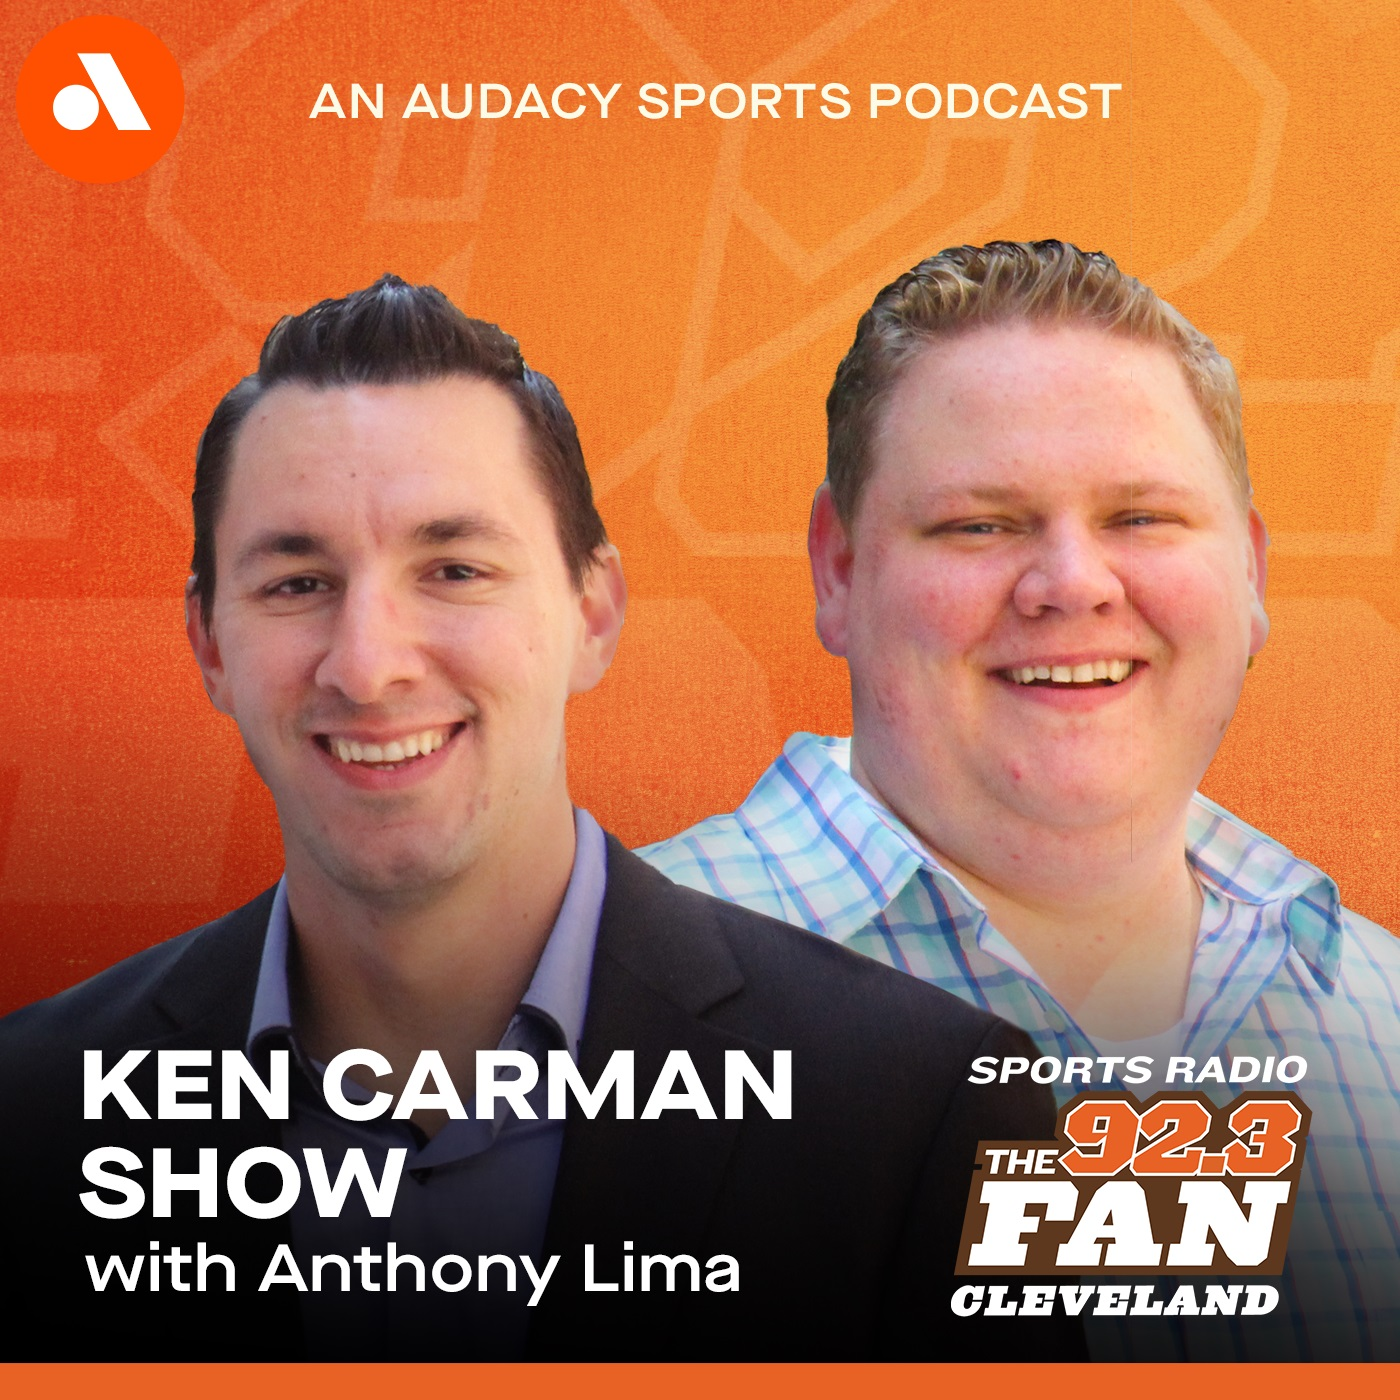 Vic Joseph joins Ken Carman and Anthony Lima to talk WWE and WrestleMania.